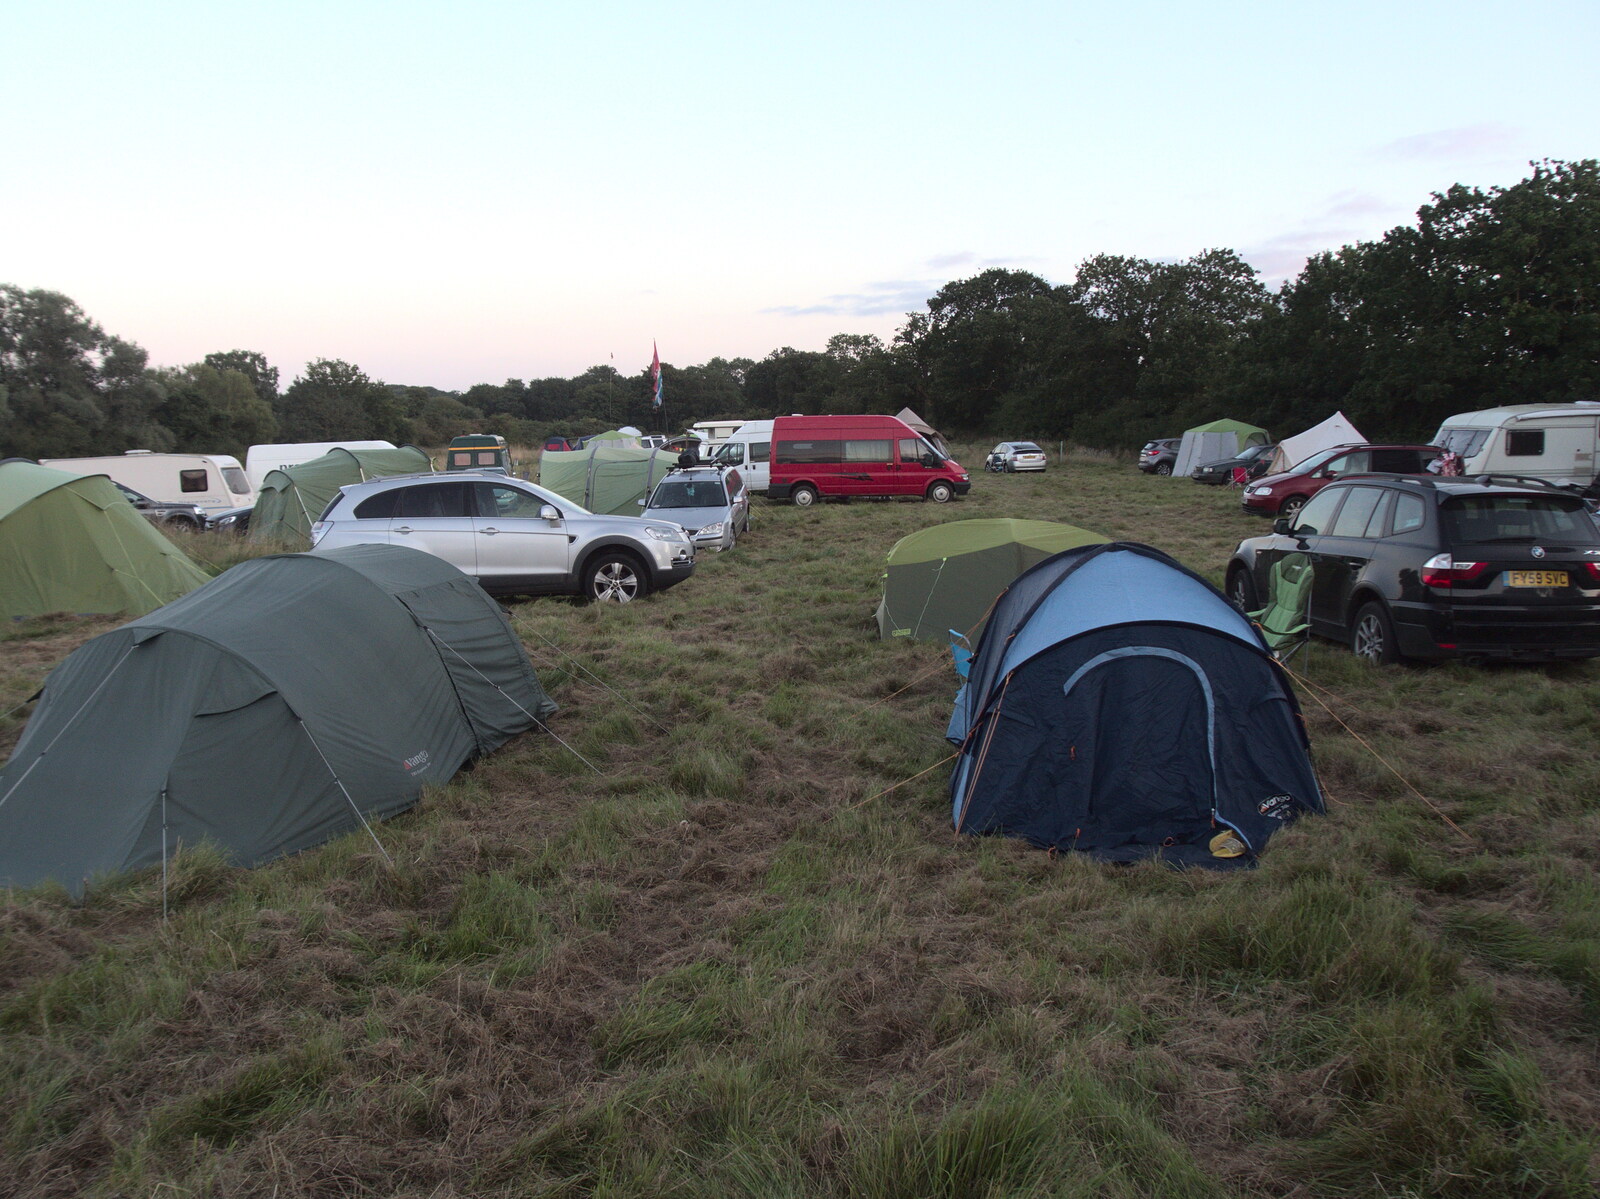 Tent city in the quiet camping area from Maui Waui Festival, Hill Farm, Gressenhall, Norfolk - 28th August 2021